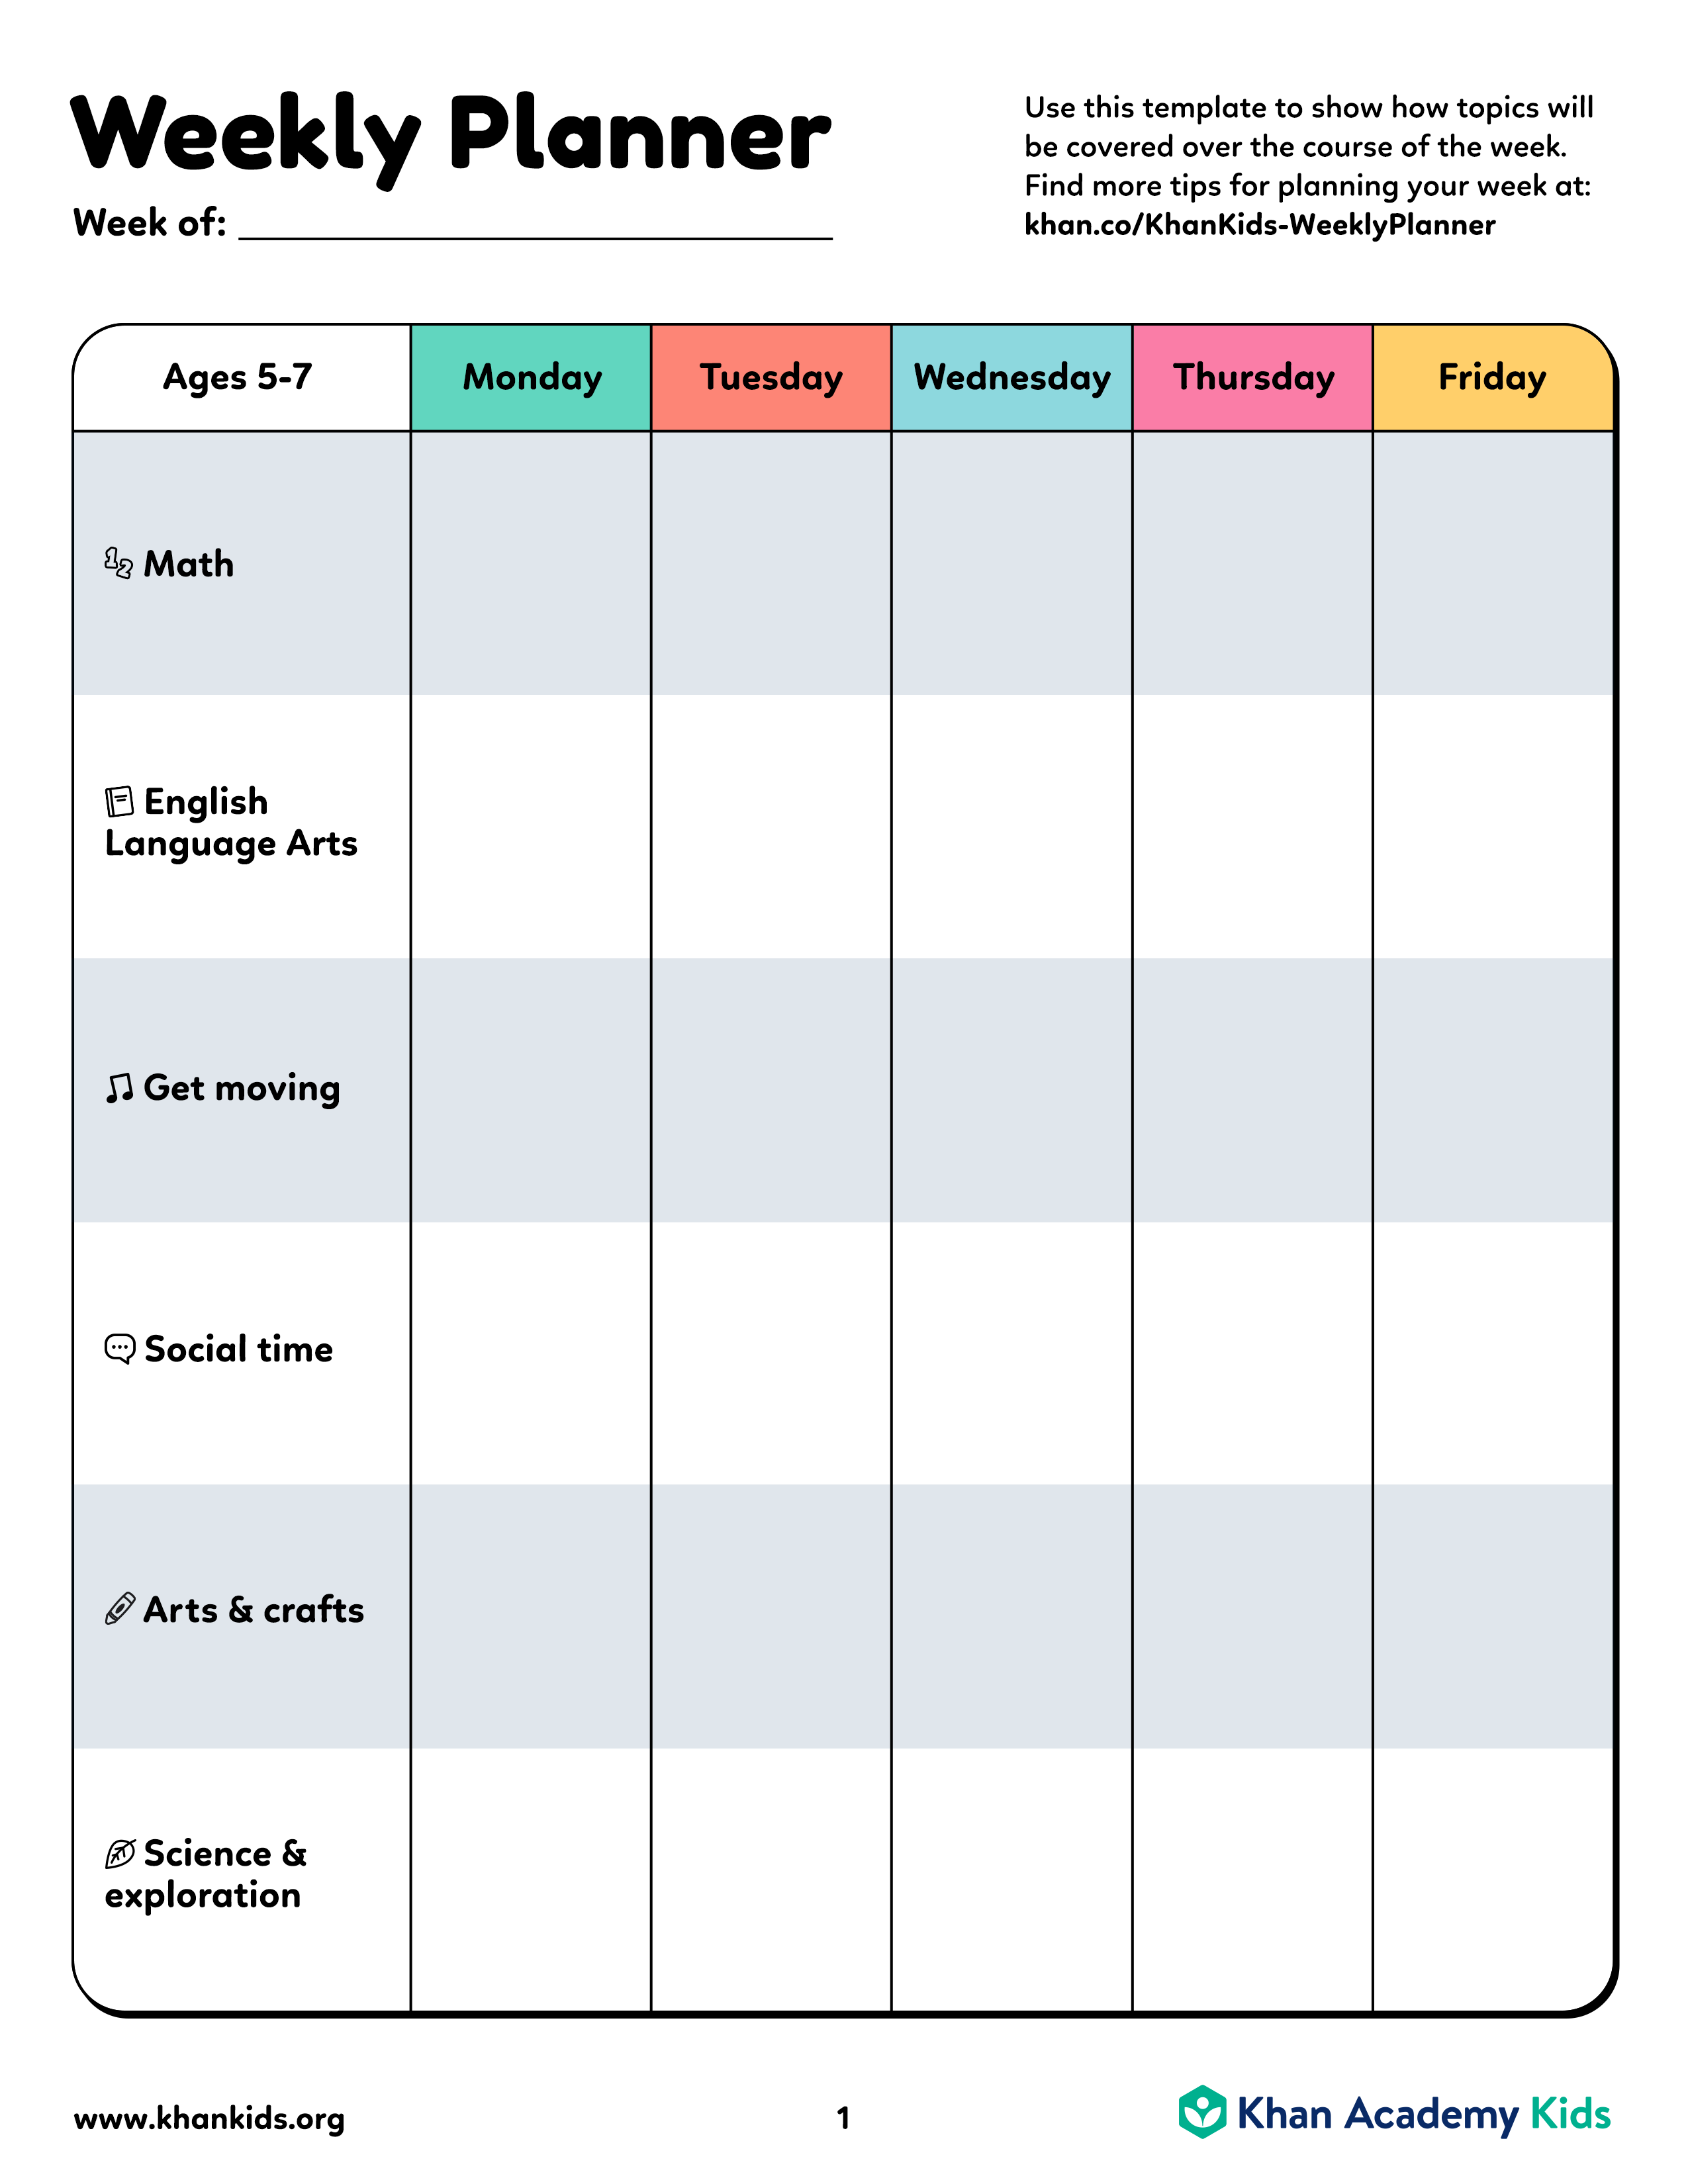 KhanKids_BTSWeeklyPlanner2020_Ages5-7_Page_1.png